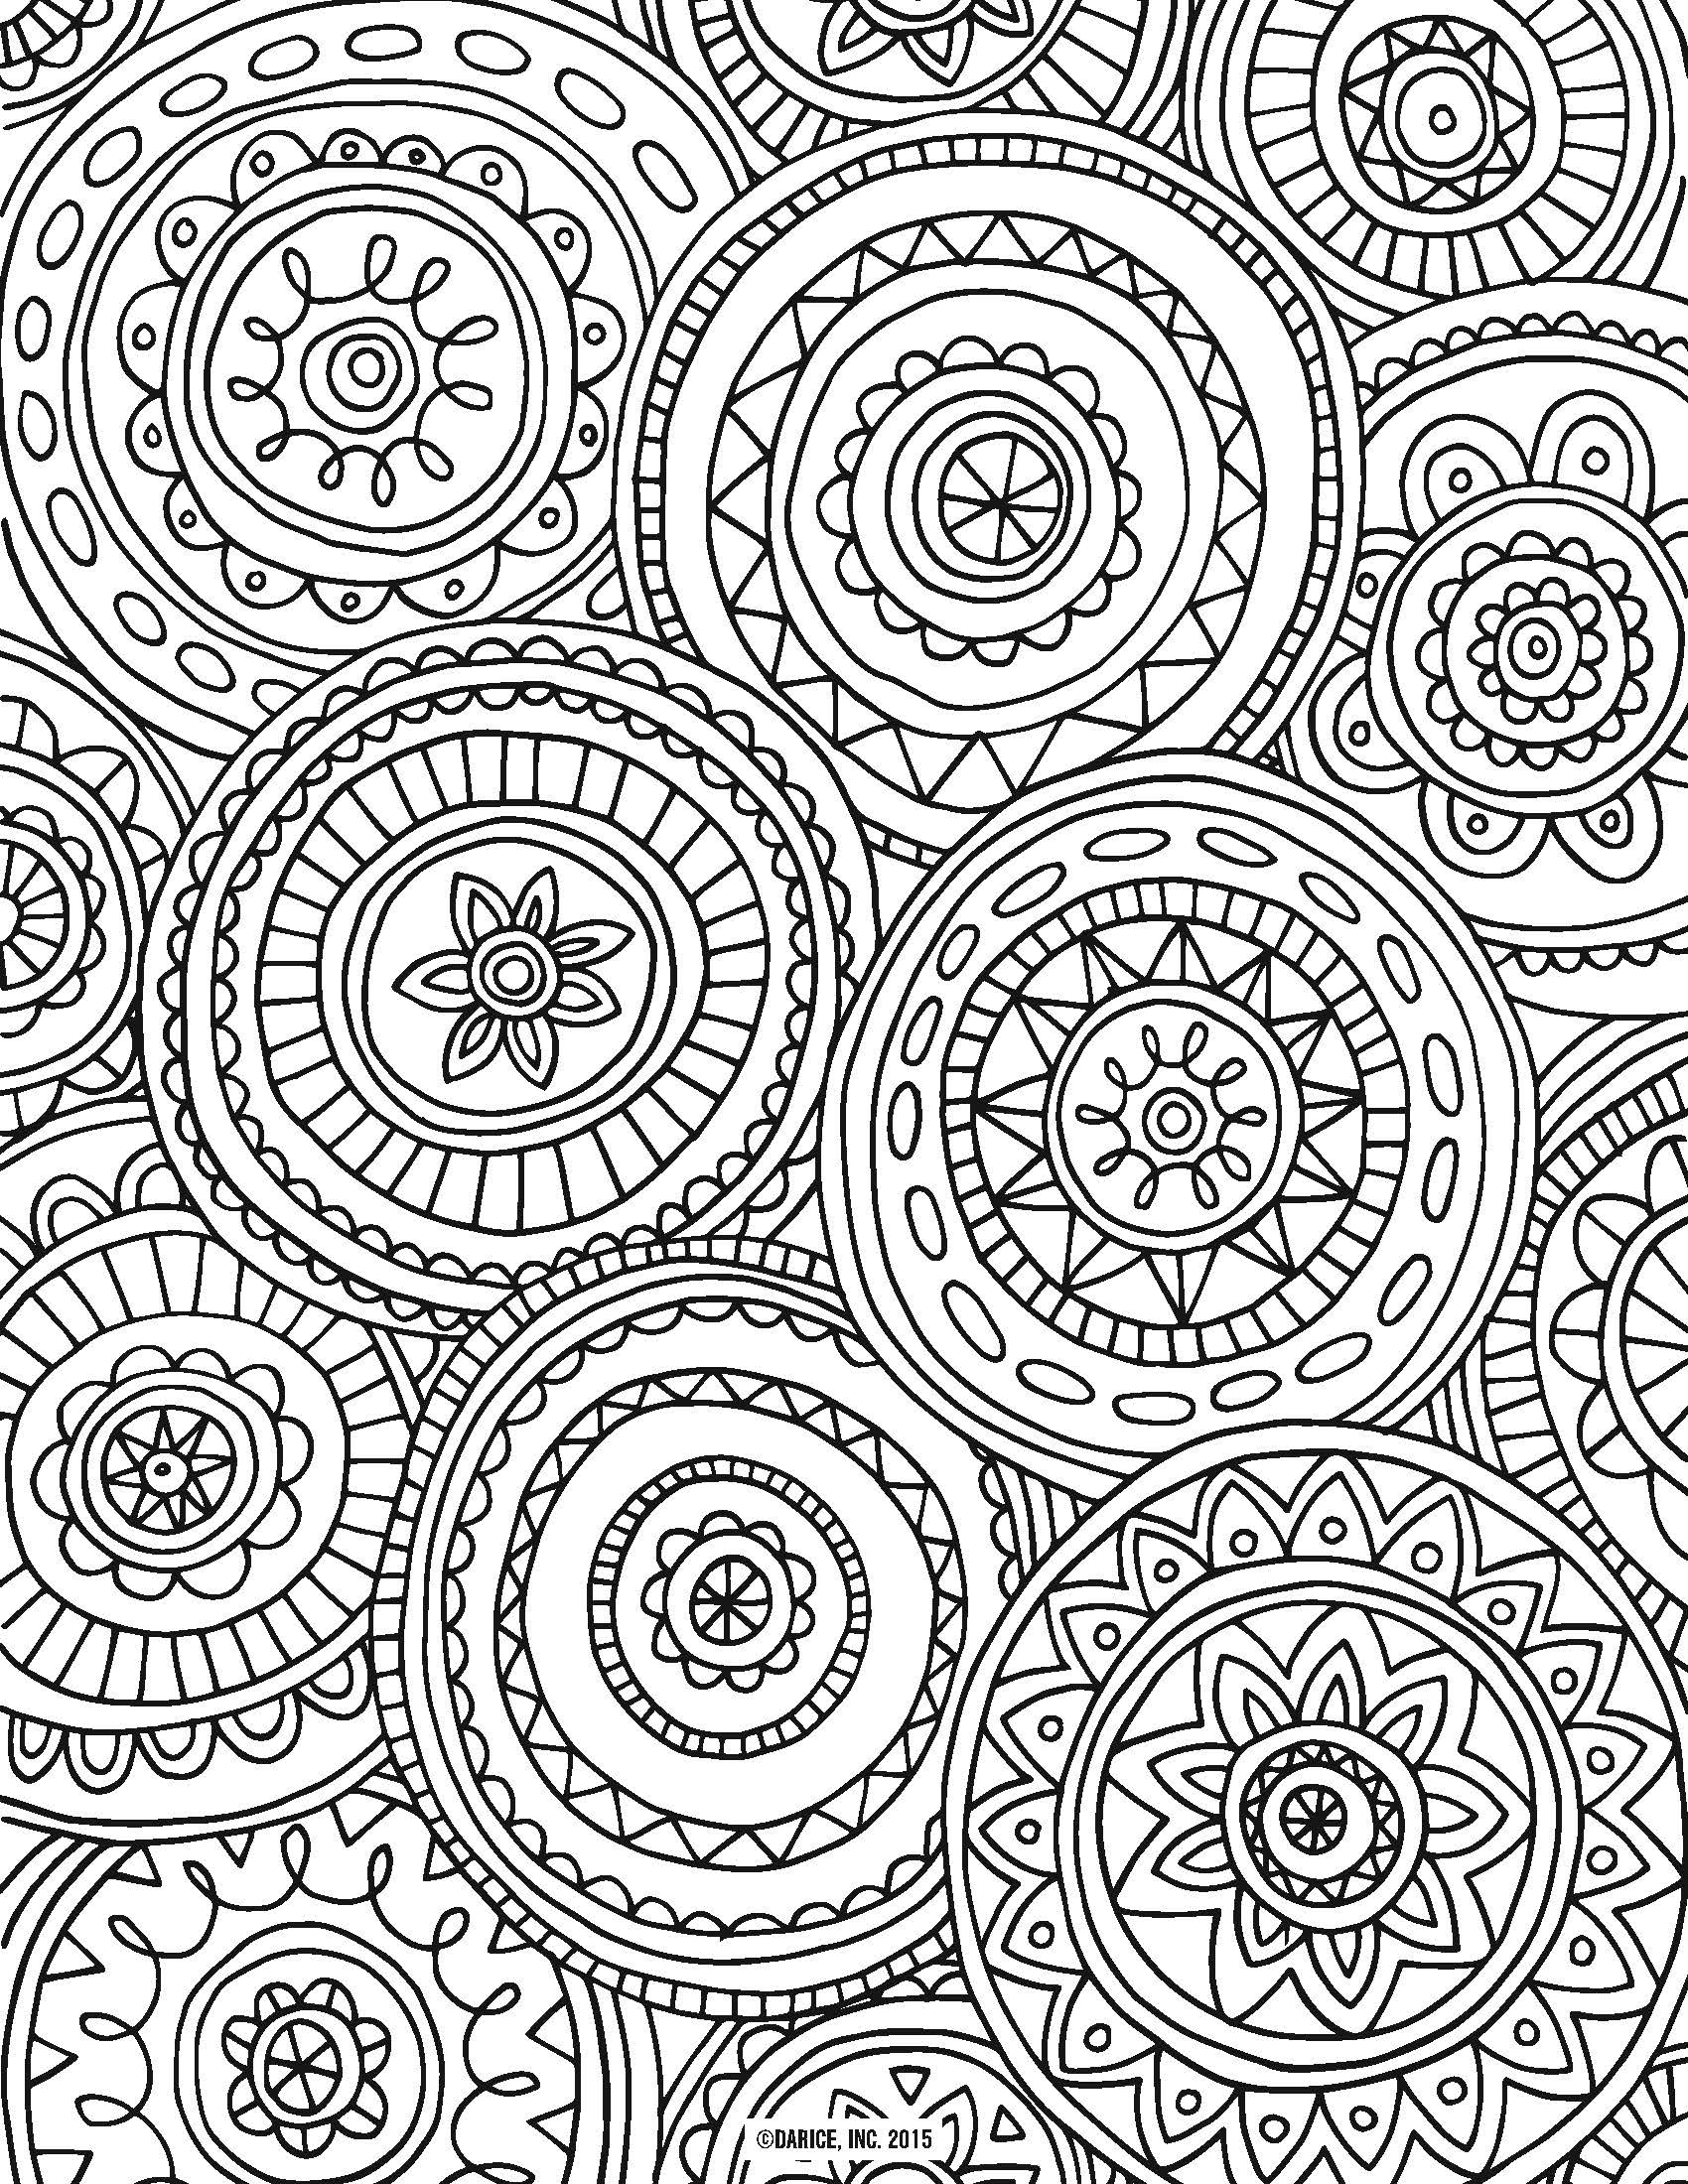 9 Free Printable Adult Coloring Pages | Pat Catan&amp;#039;s Blog - Free Printable Coloring Pages For Adults Only